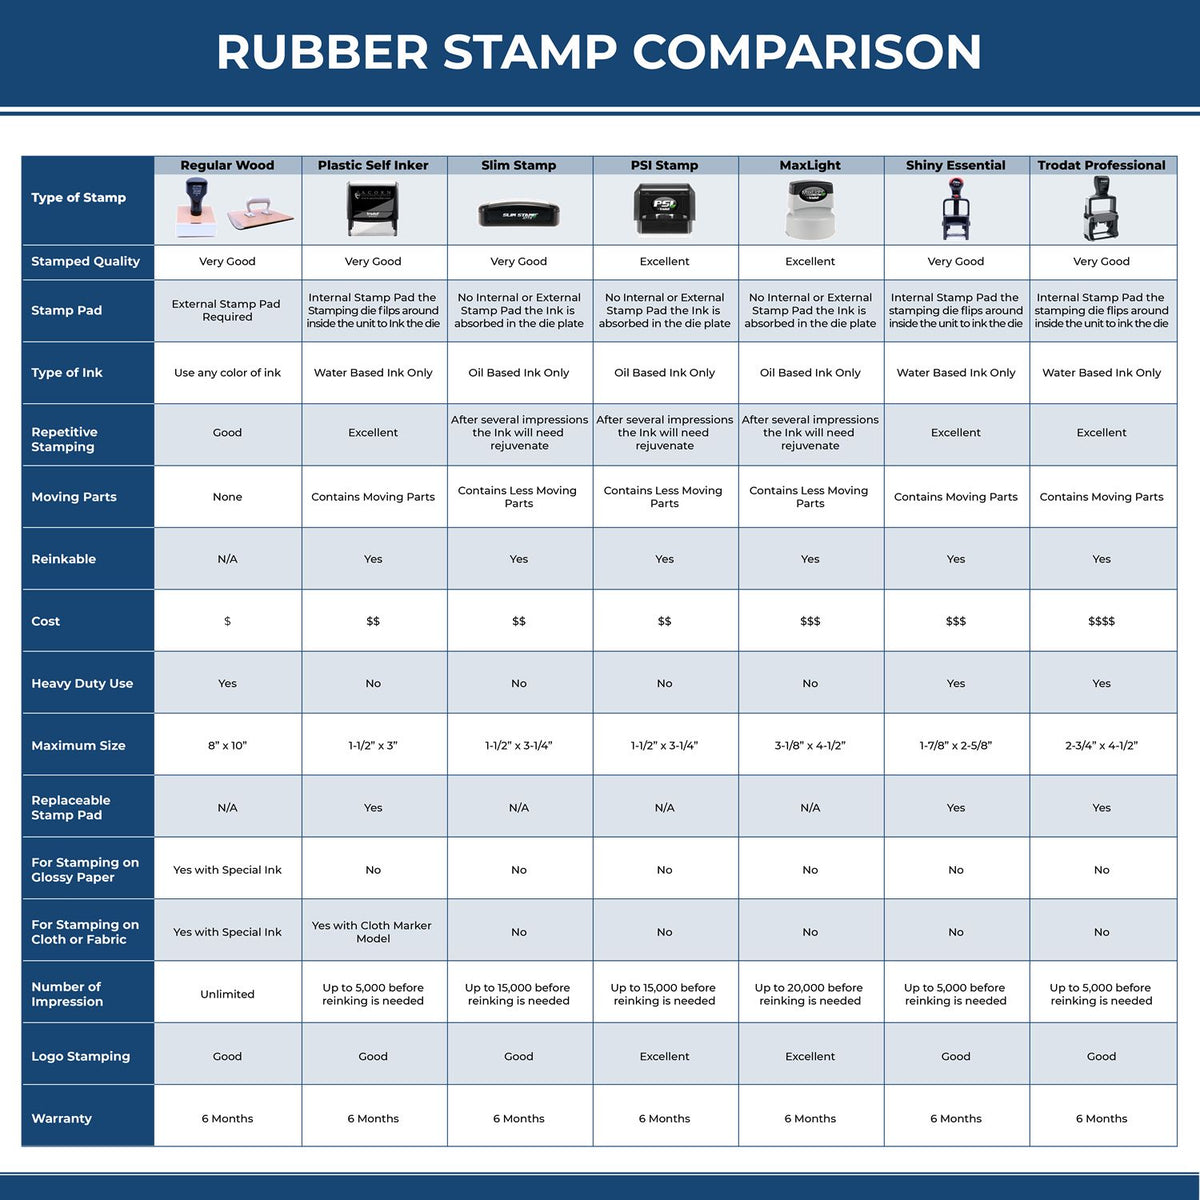 A comparison chart for the different types of mount models available for the Heavy-Duty Washington Rectangular Notary Stamp.